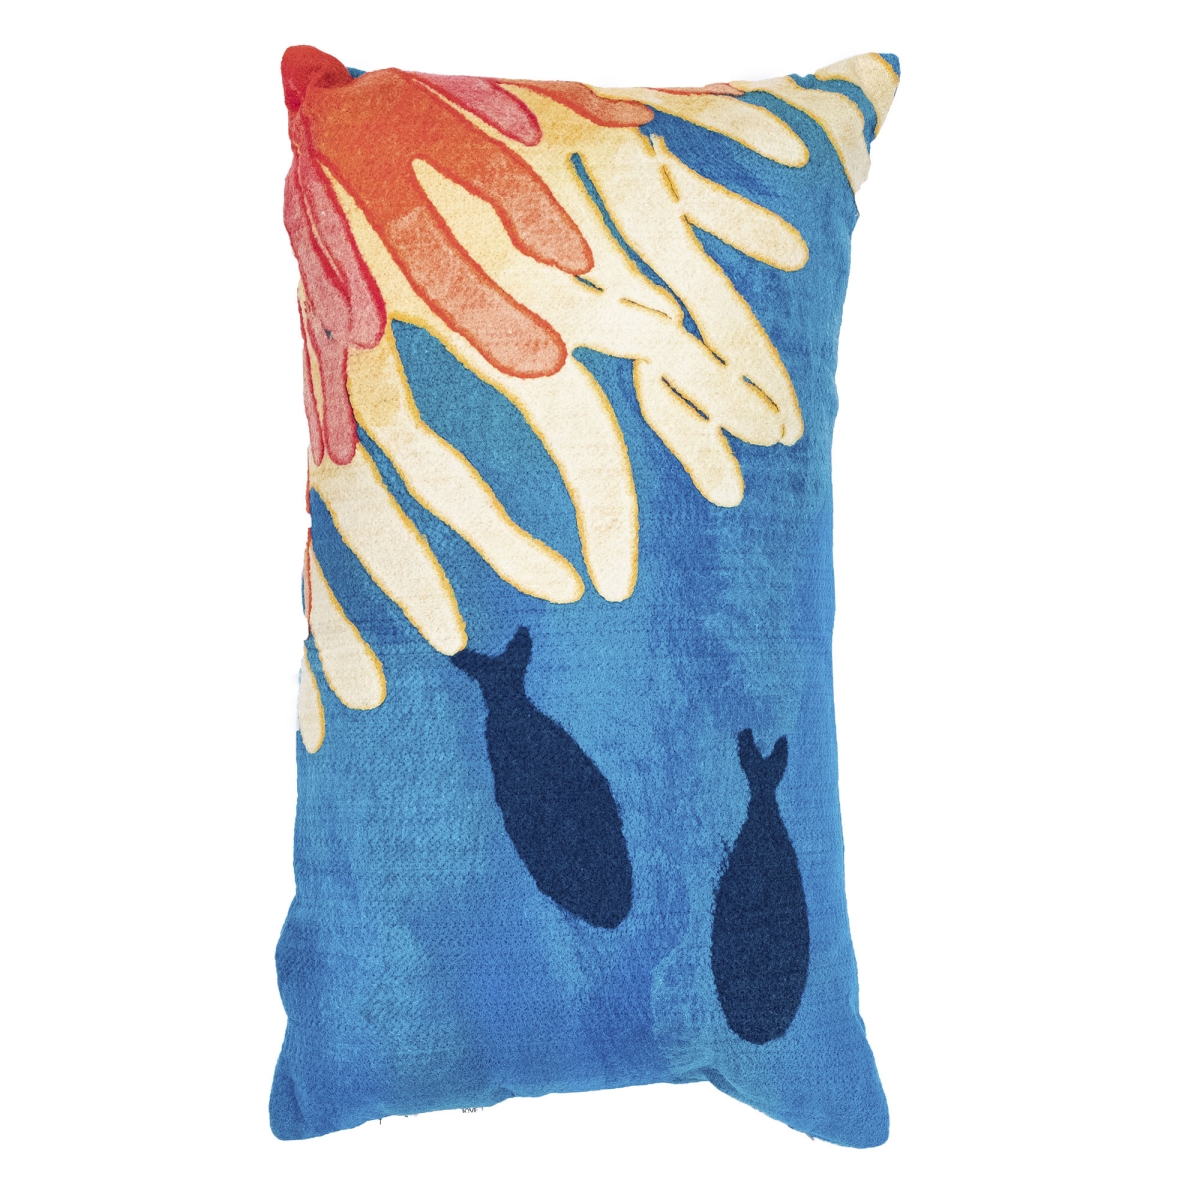 Trans-ocean Imports 7sc1s421117 12 X 20 In. Liora Manne Visions Iii Reef & Fish Indoor & Outdoor Handmade Square Pillow - Coral